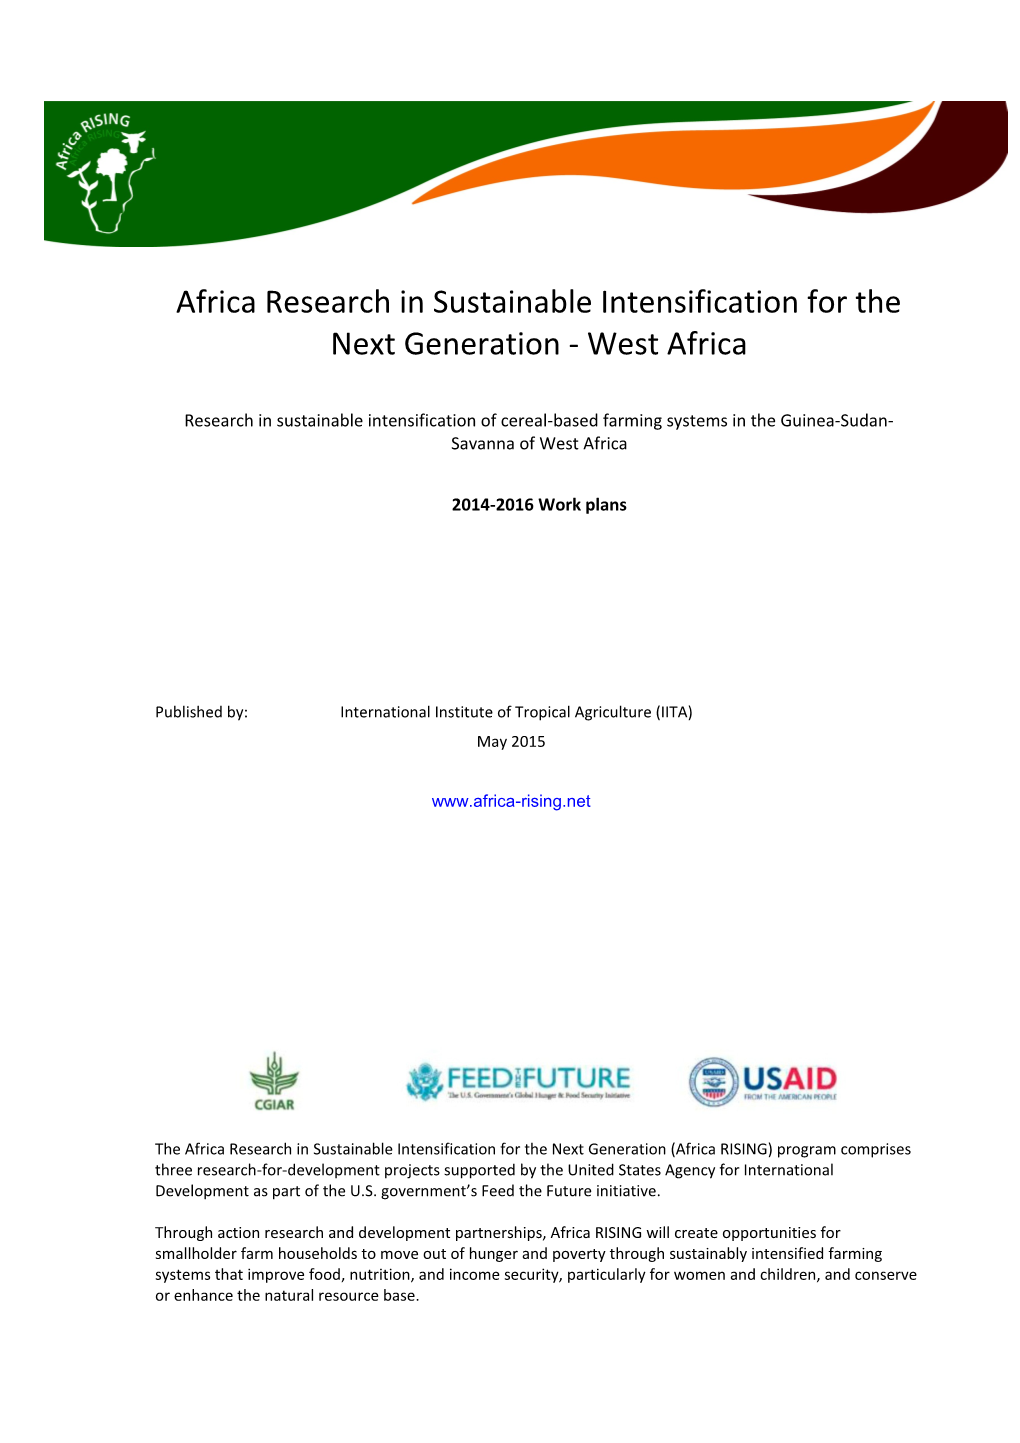 Africa Research in Sustainable Intensification for the Next Generation - West Africa